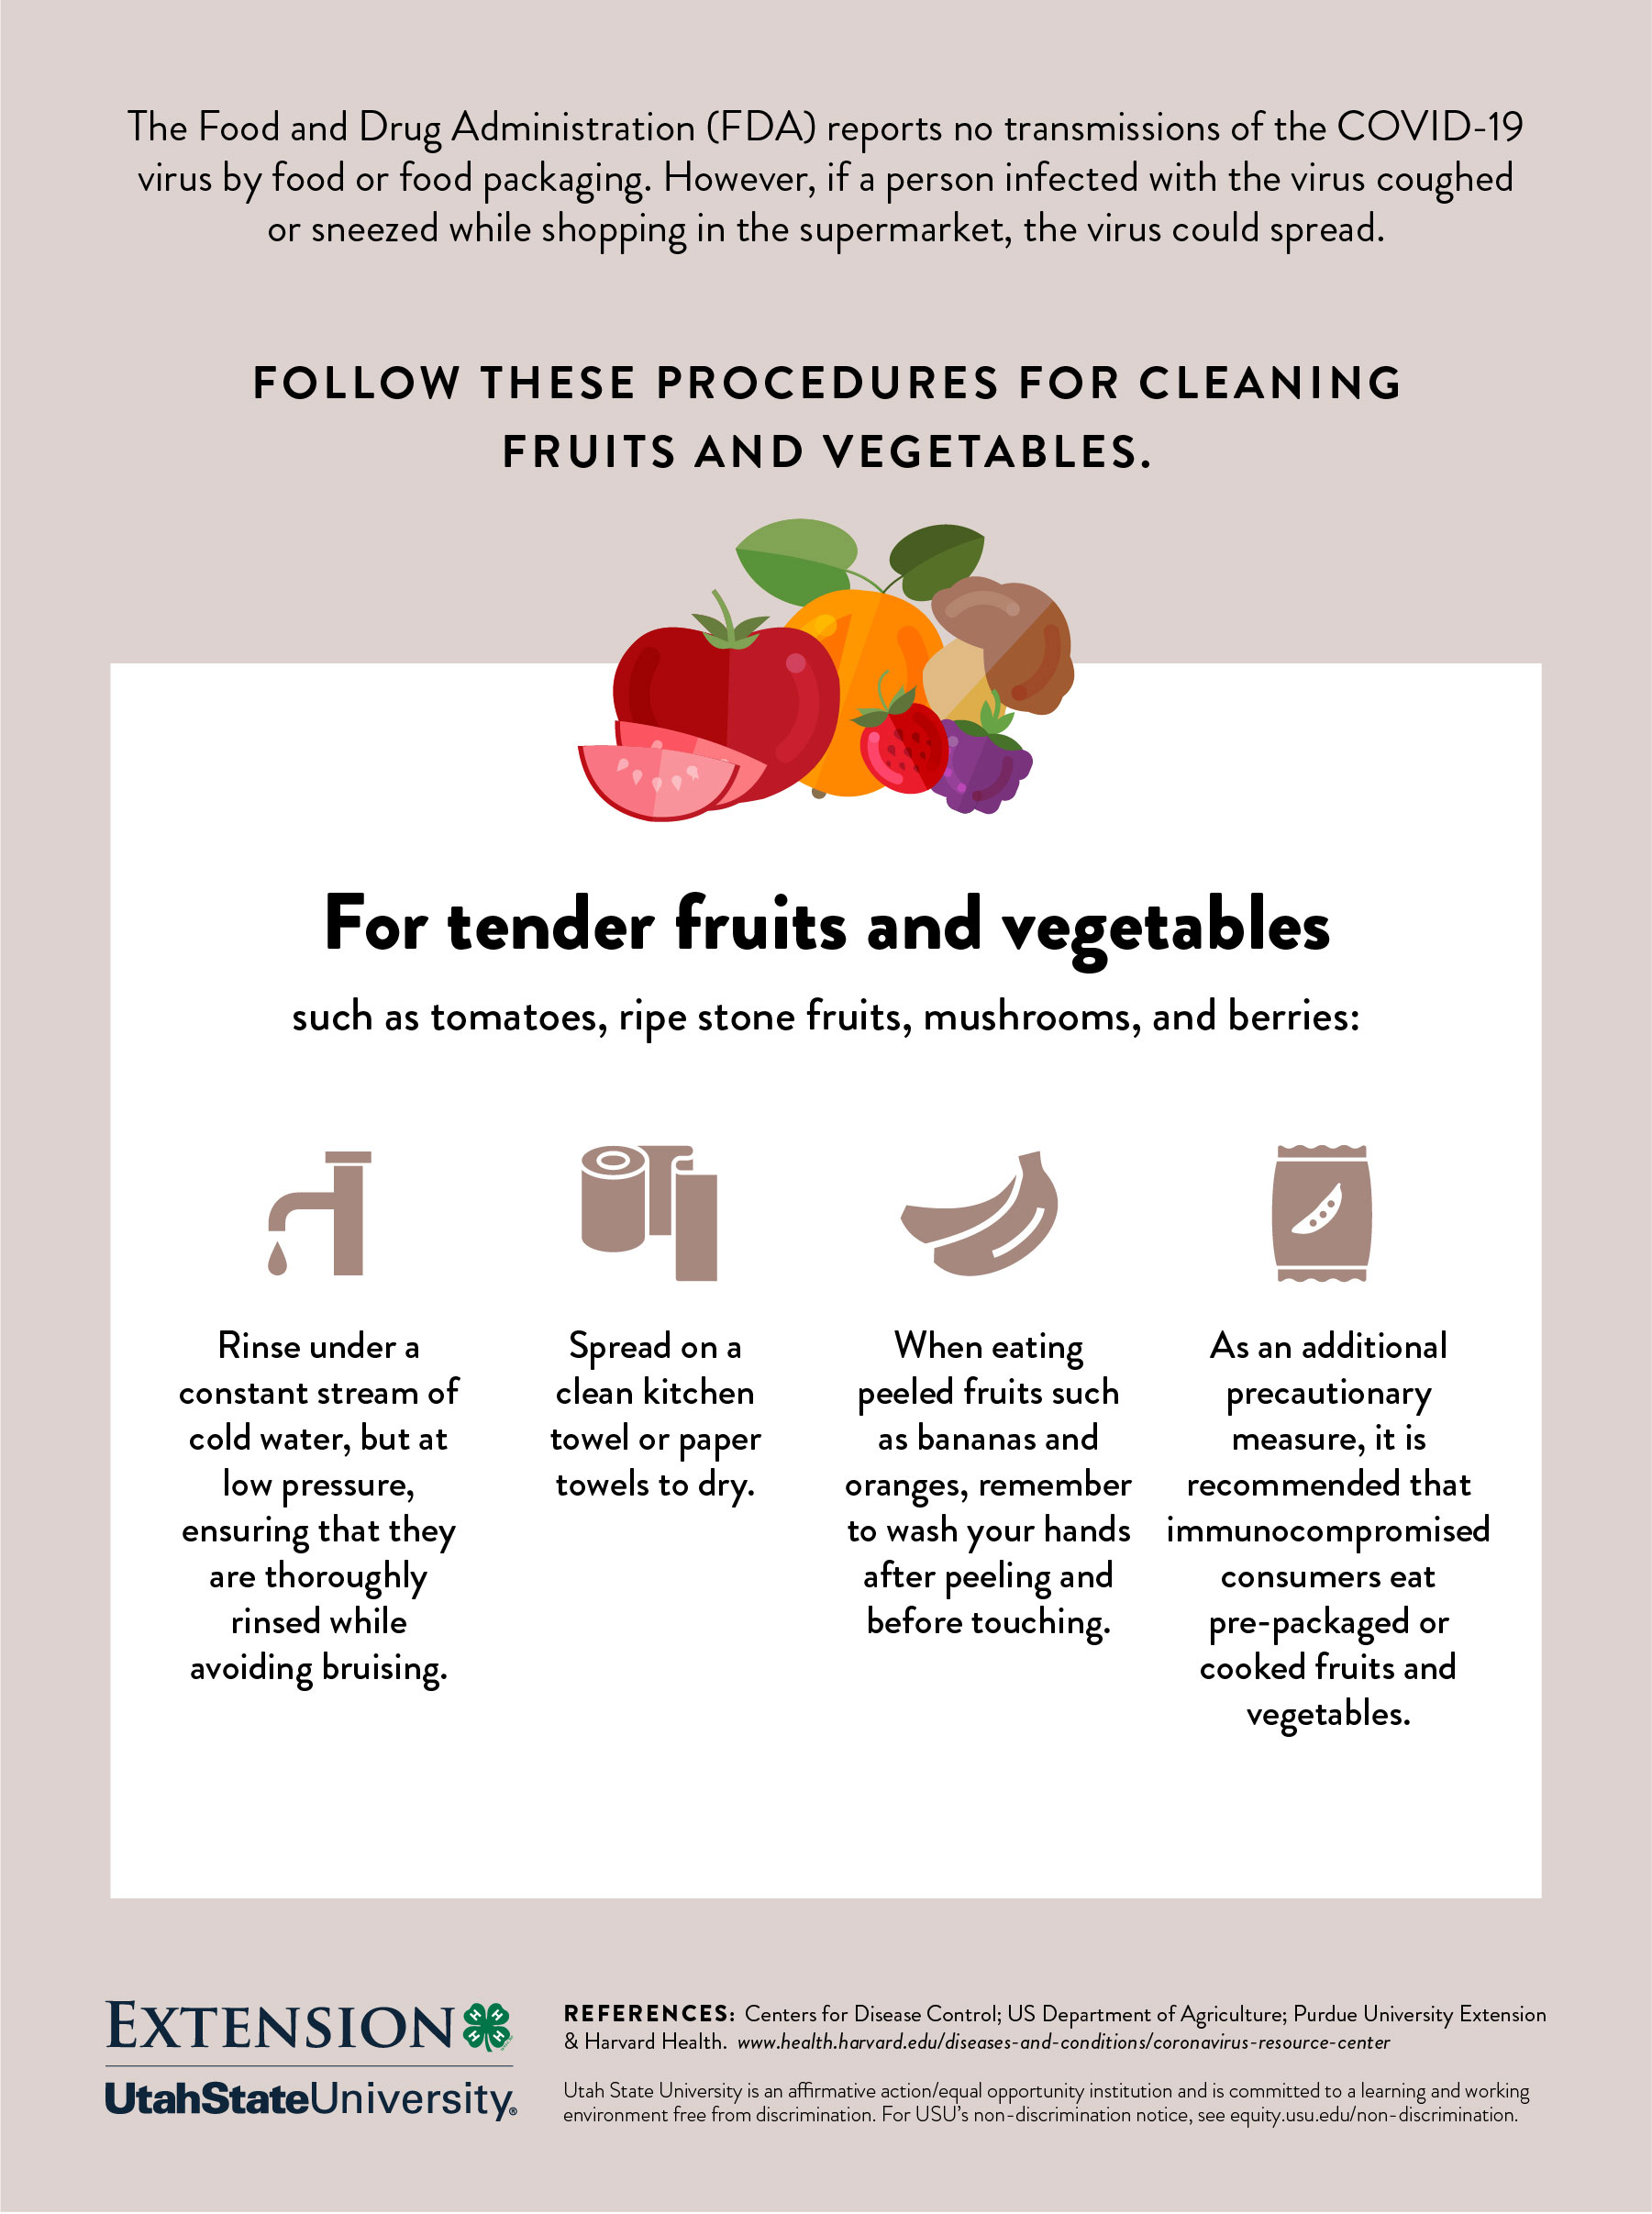 Cleaning tender fruits and veggies